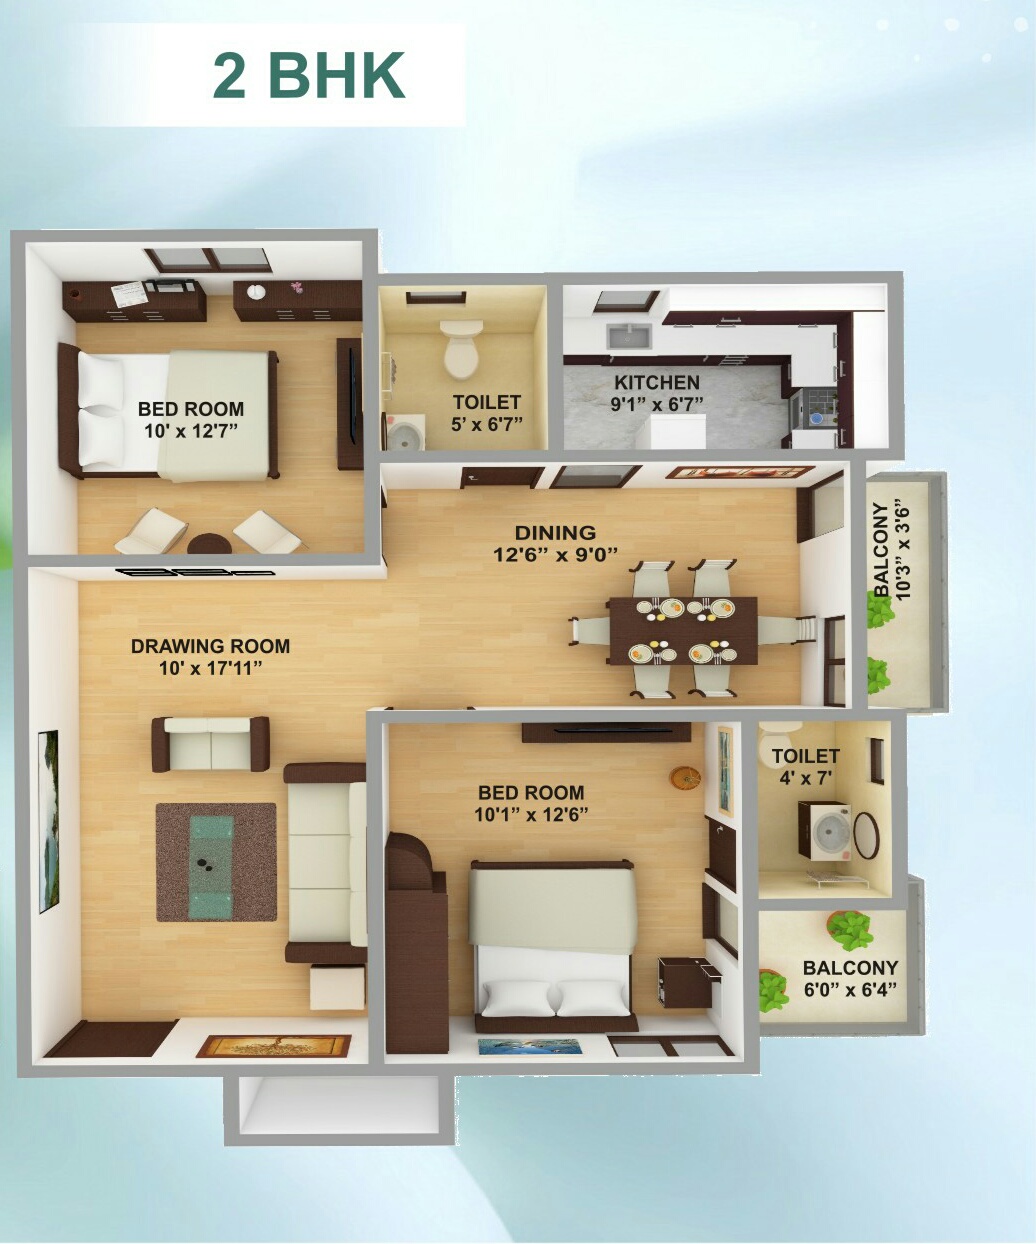 2 BHK Flats in Ranchi, 2 BHK Apartments 